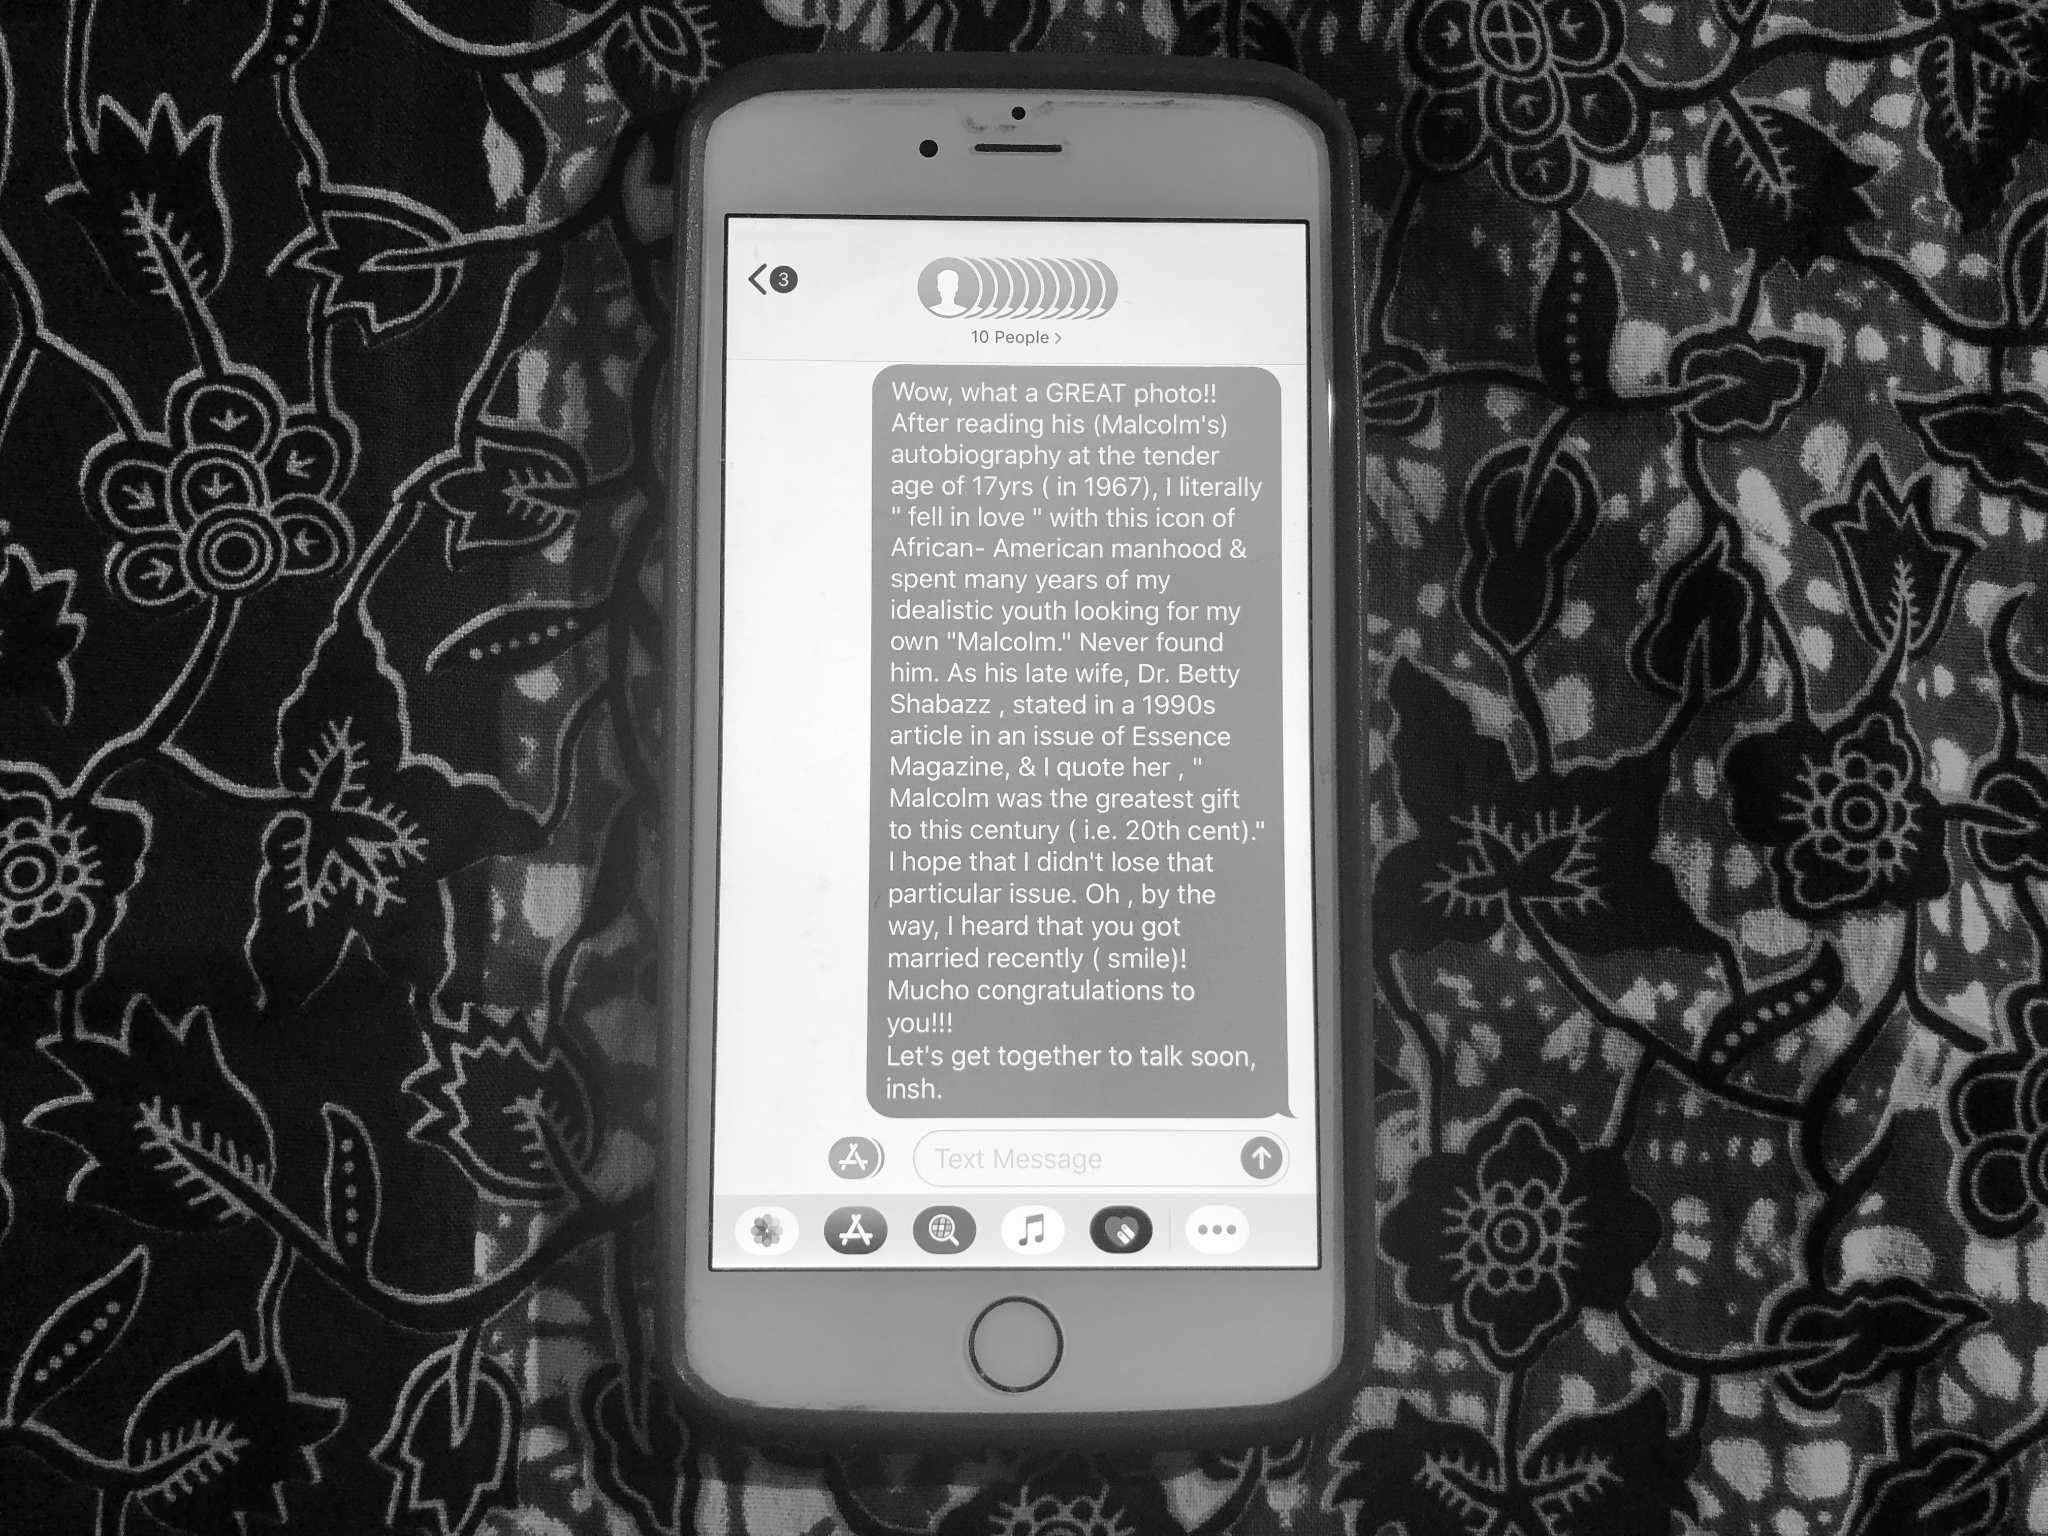 Umi's text message to a friend in 2015 calling Malcolm X an 'icon in African-American manhood' (Umi's Archive))